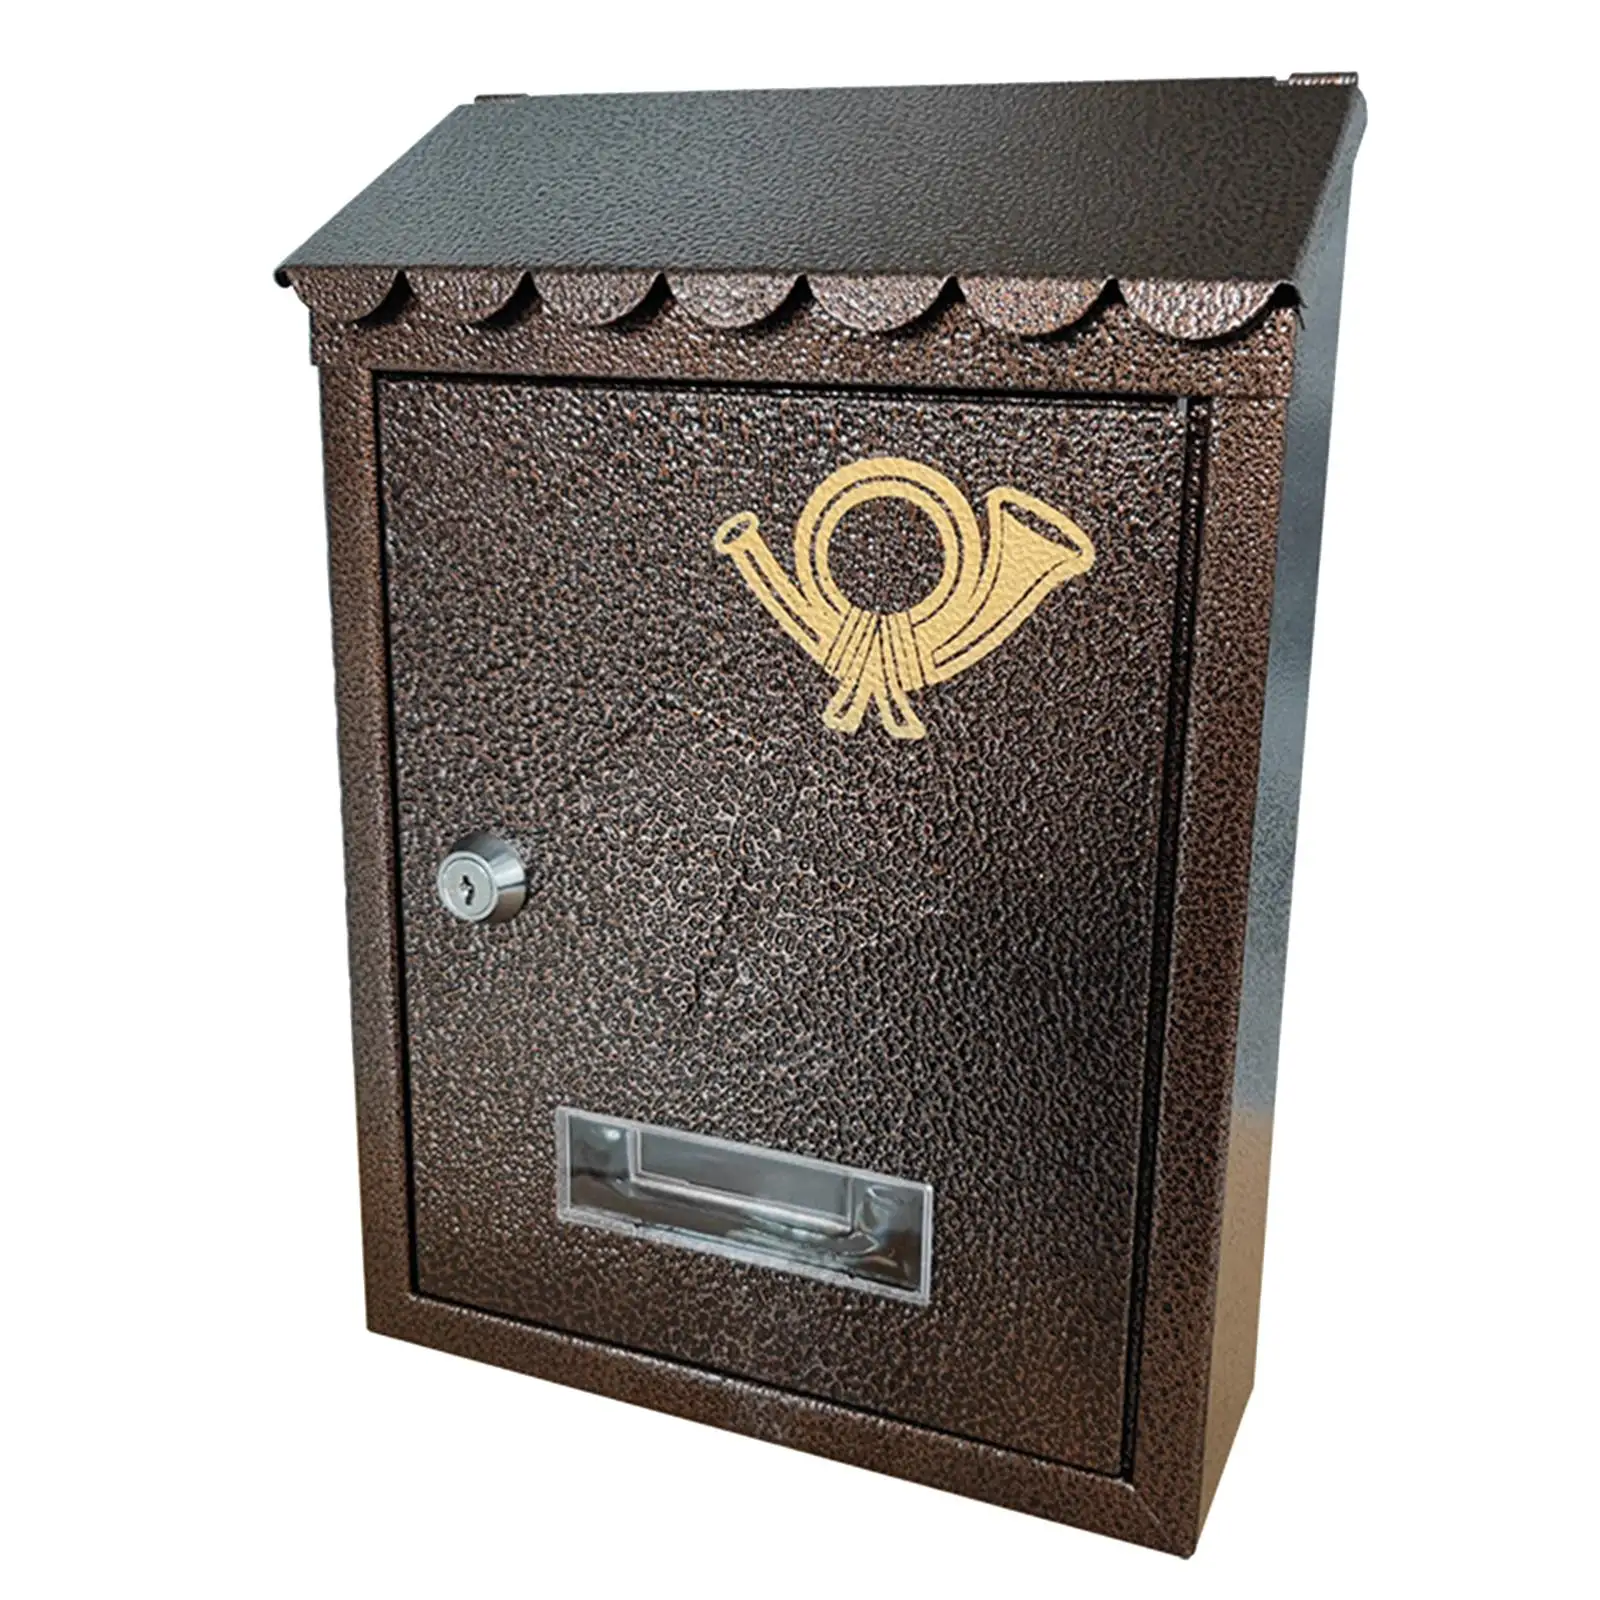 Wall Mount Mailbox Commercial Use Locking Front Door Outdoor Business Decor Iron Porch 21.5x7x30cm Post Box Letterbox Mailboxes